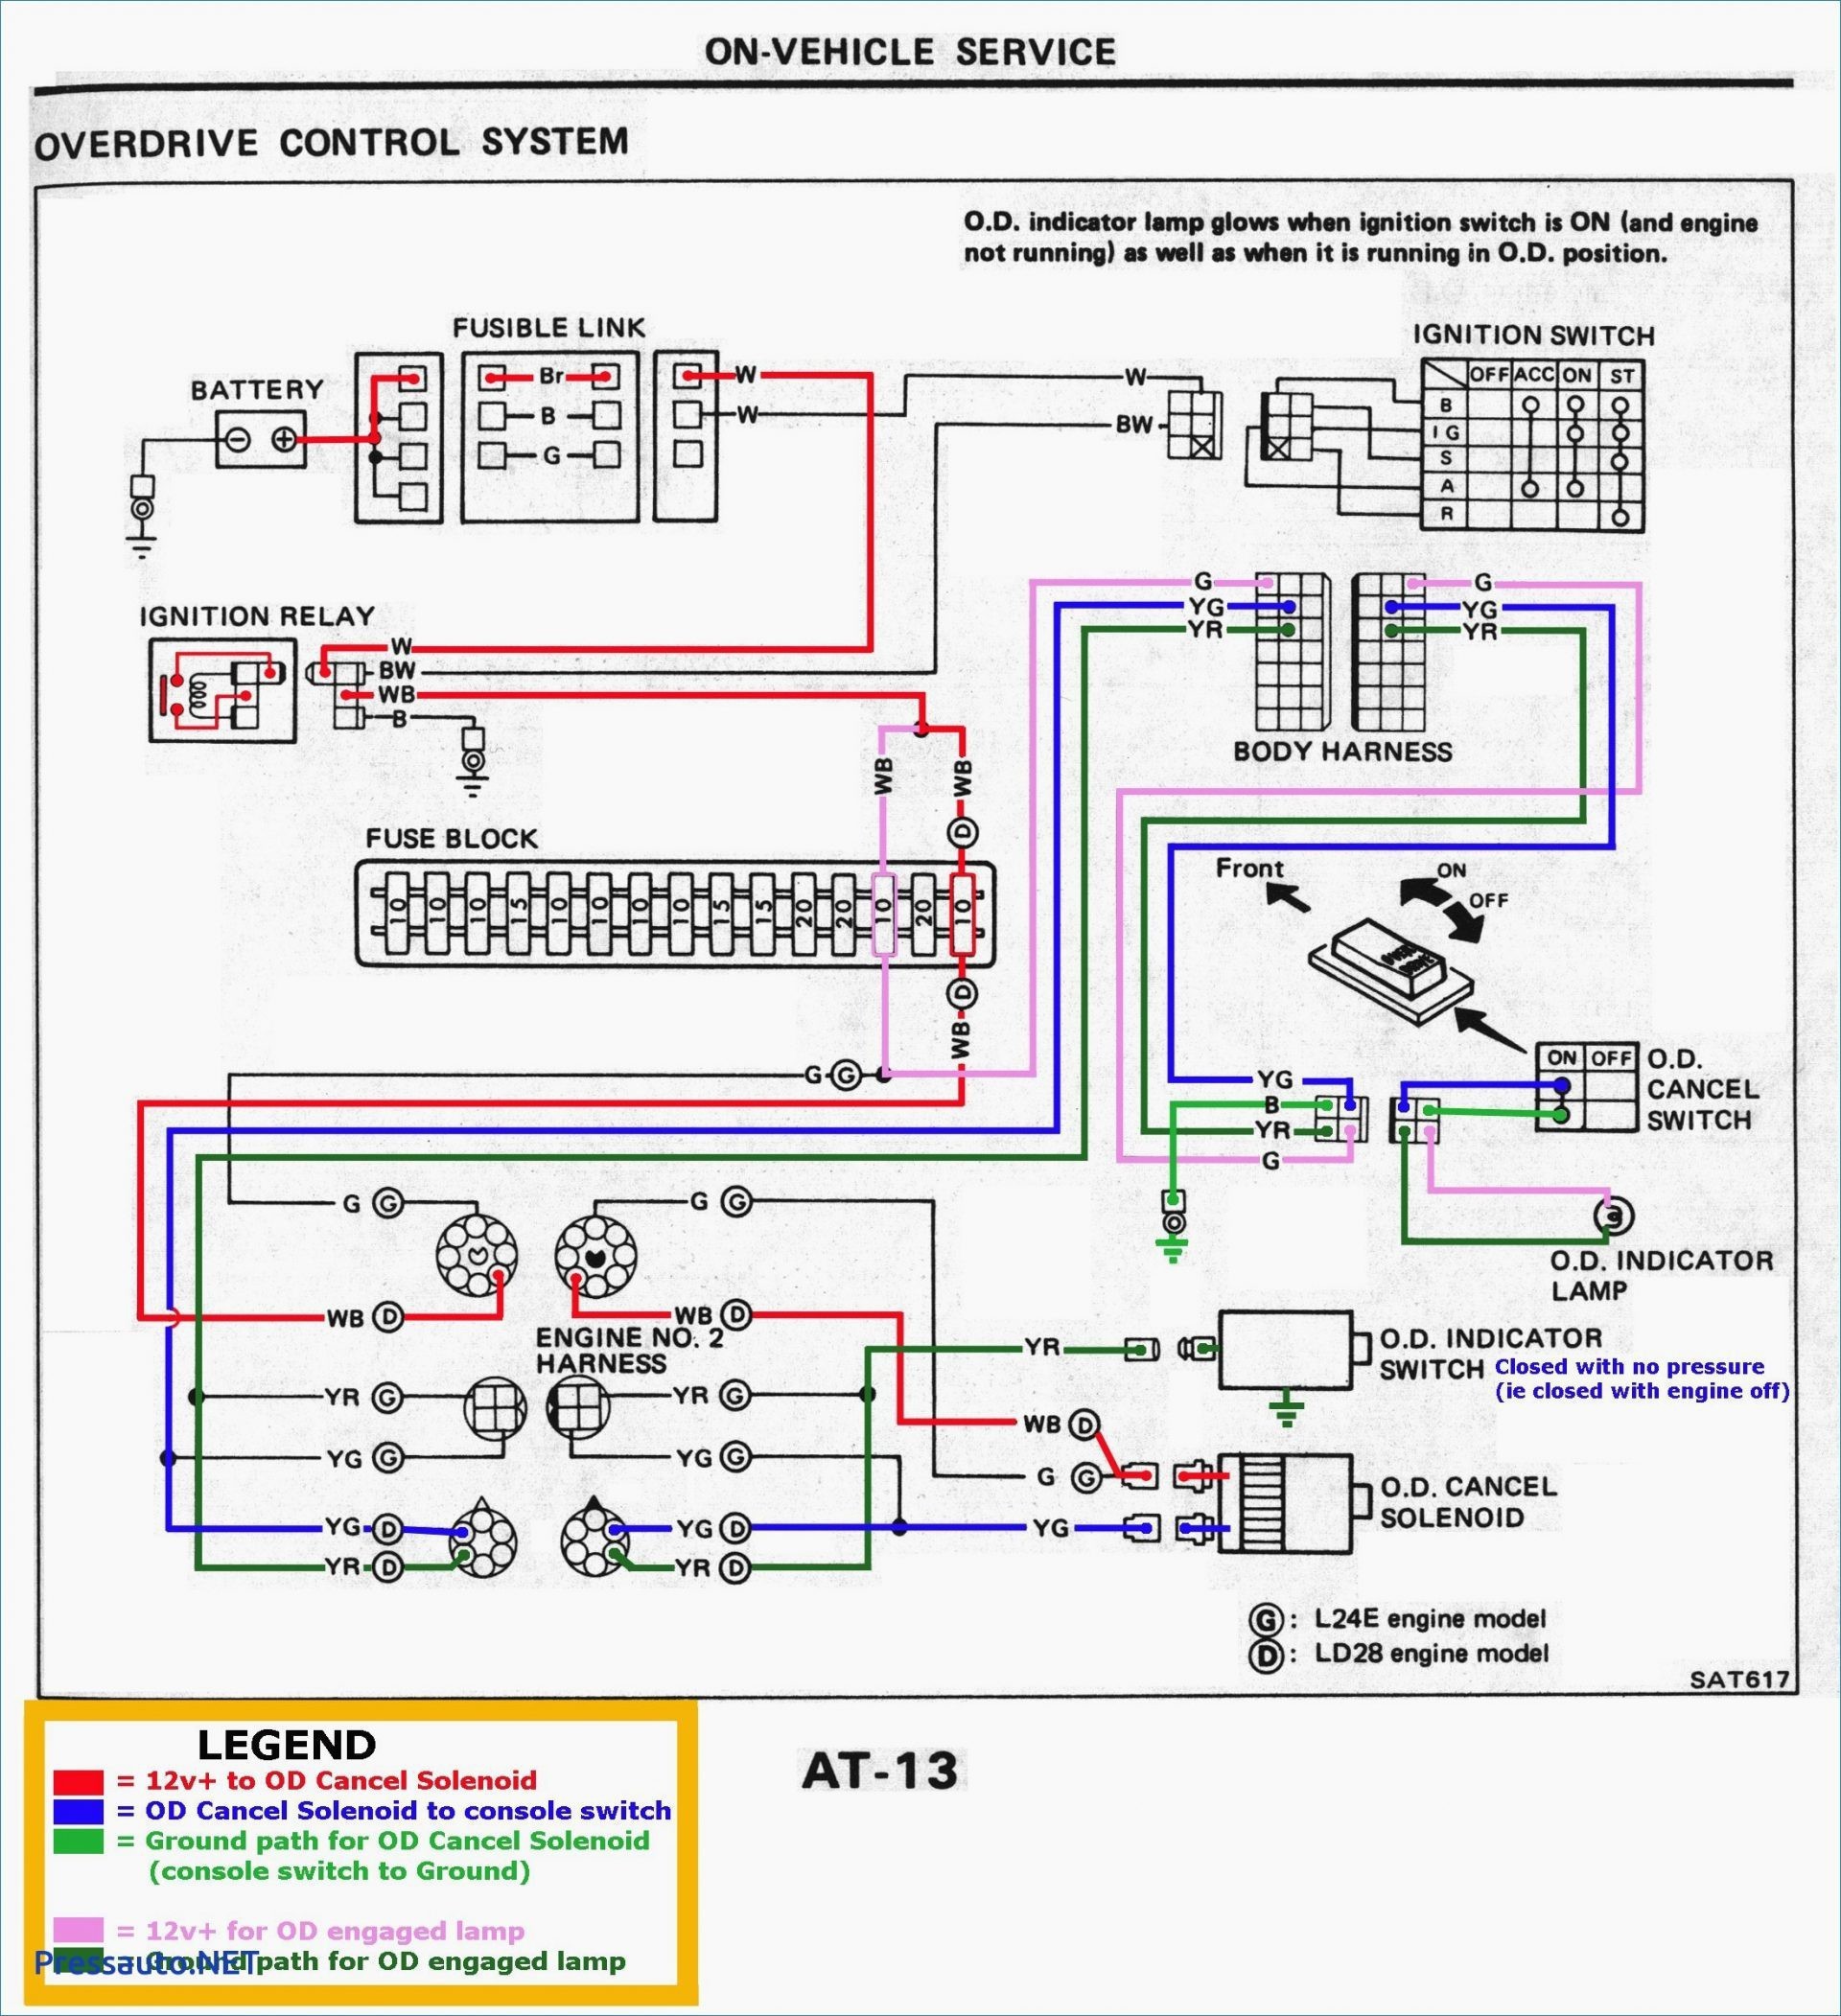 Wiring Diagram For Chevy Trailer Plug Awesome Wiring Diagram For Chevy Trailer Plug Fresh Wiring Diagram